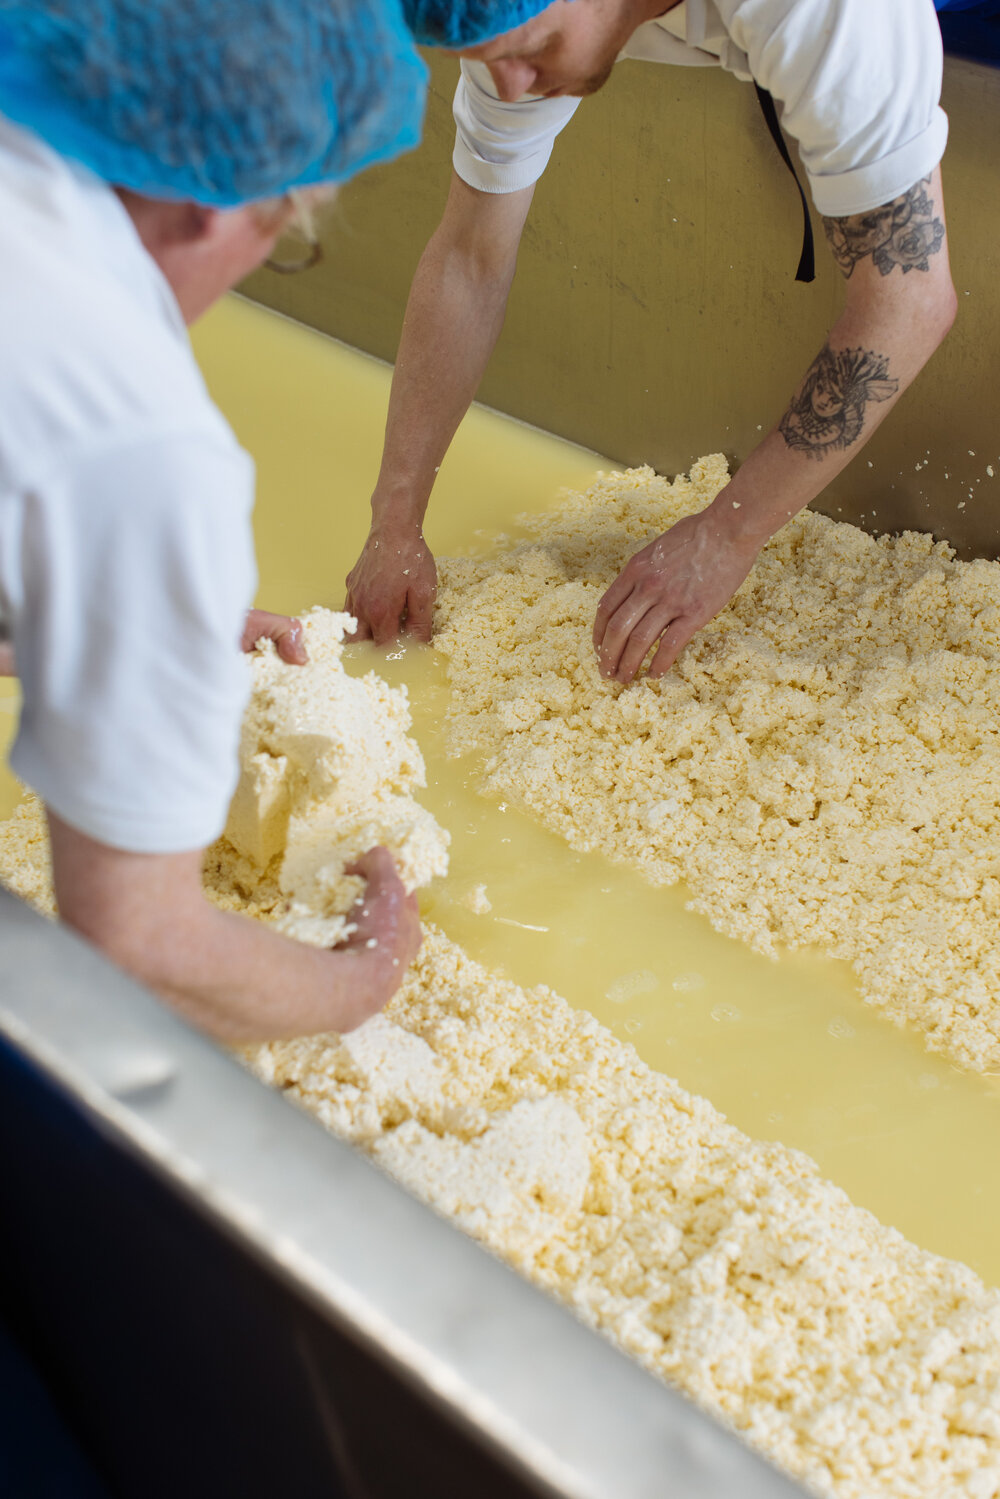 Gathering the Candy curds